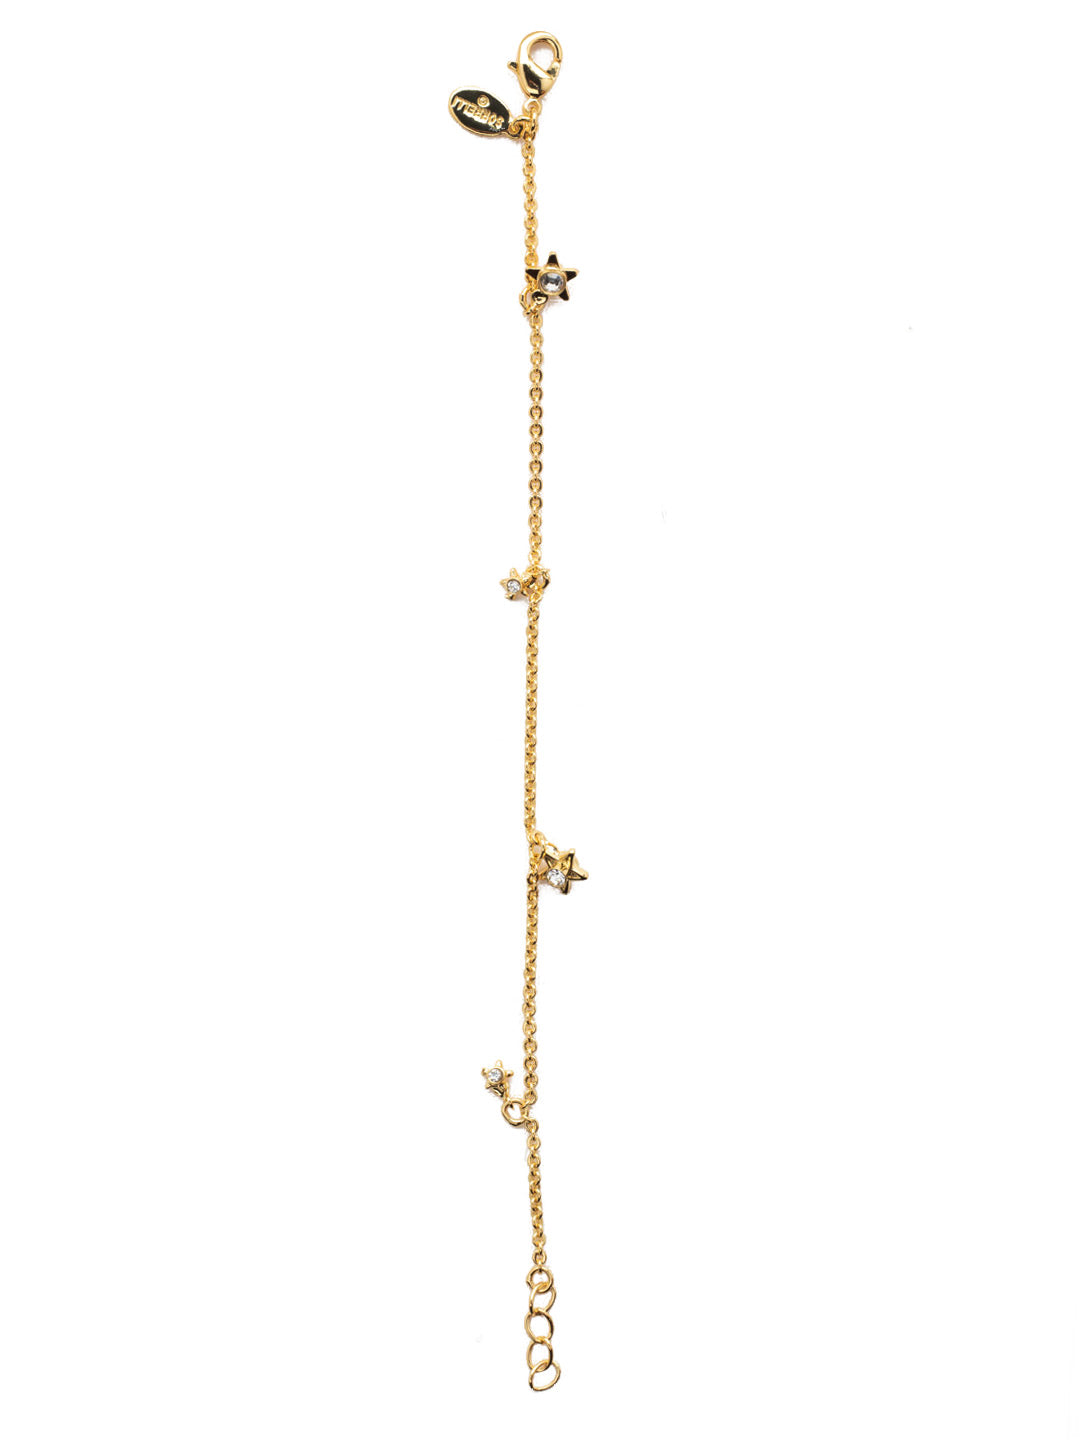 Asteria Tennis Bracelet - 4BEZ23BGCRY - <p>The delicate details in the Asteria Tennis Bracelet make it the perfect delicate staple. A single dainty chain is base to several crystal embellished star charms, secured with a lobster claw clasp, From Sorrelli's Crystal collection in our Bright Gold-tone finish.</p>